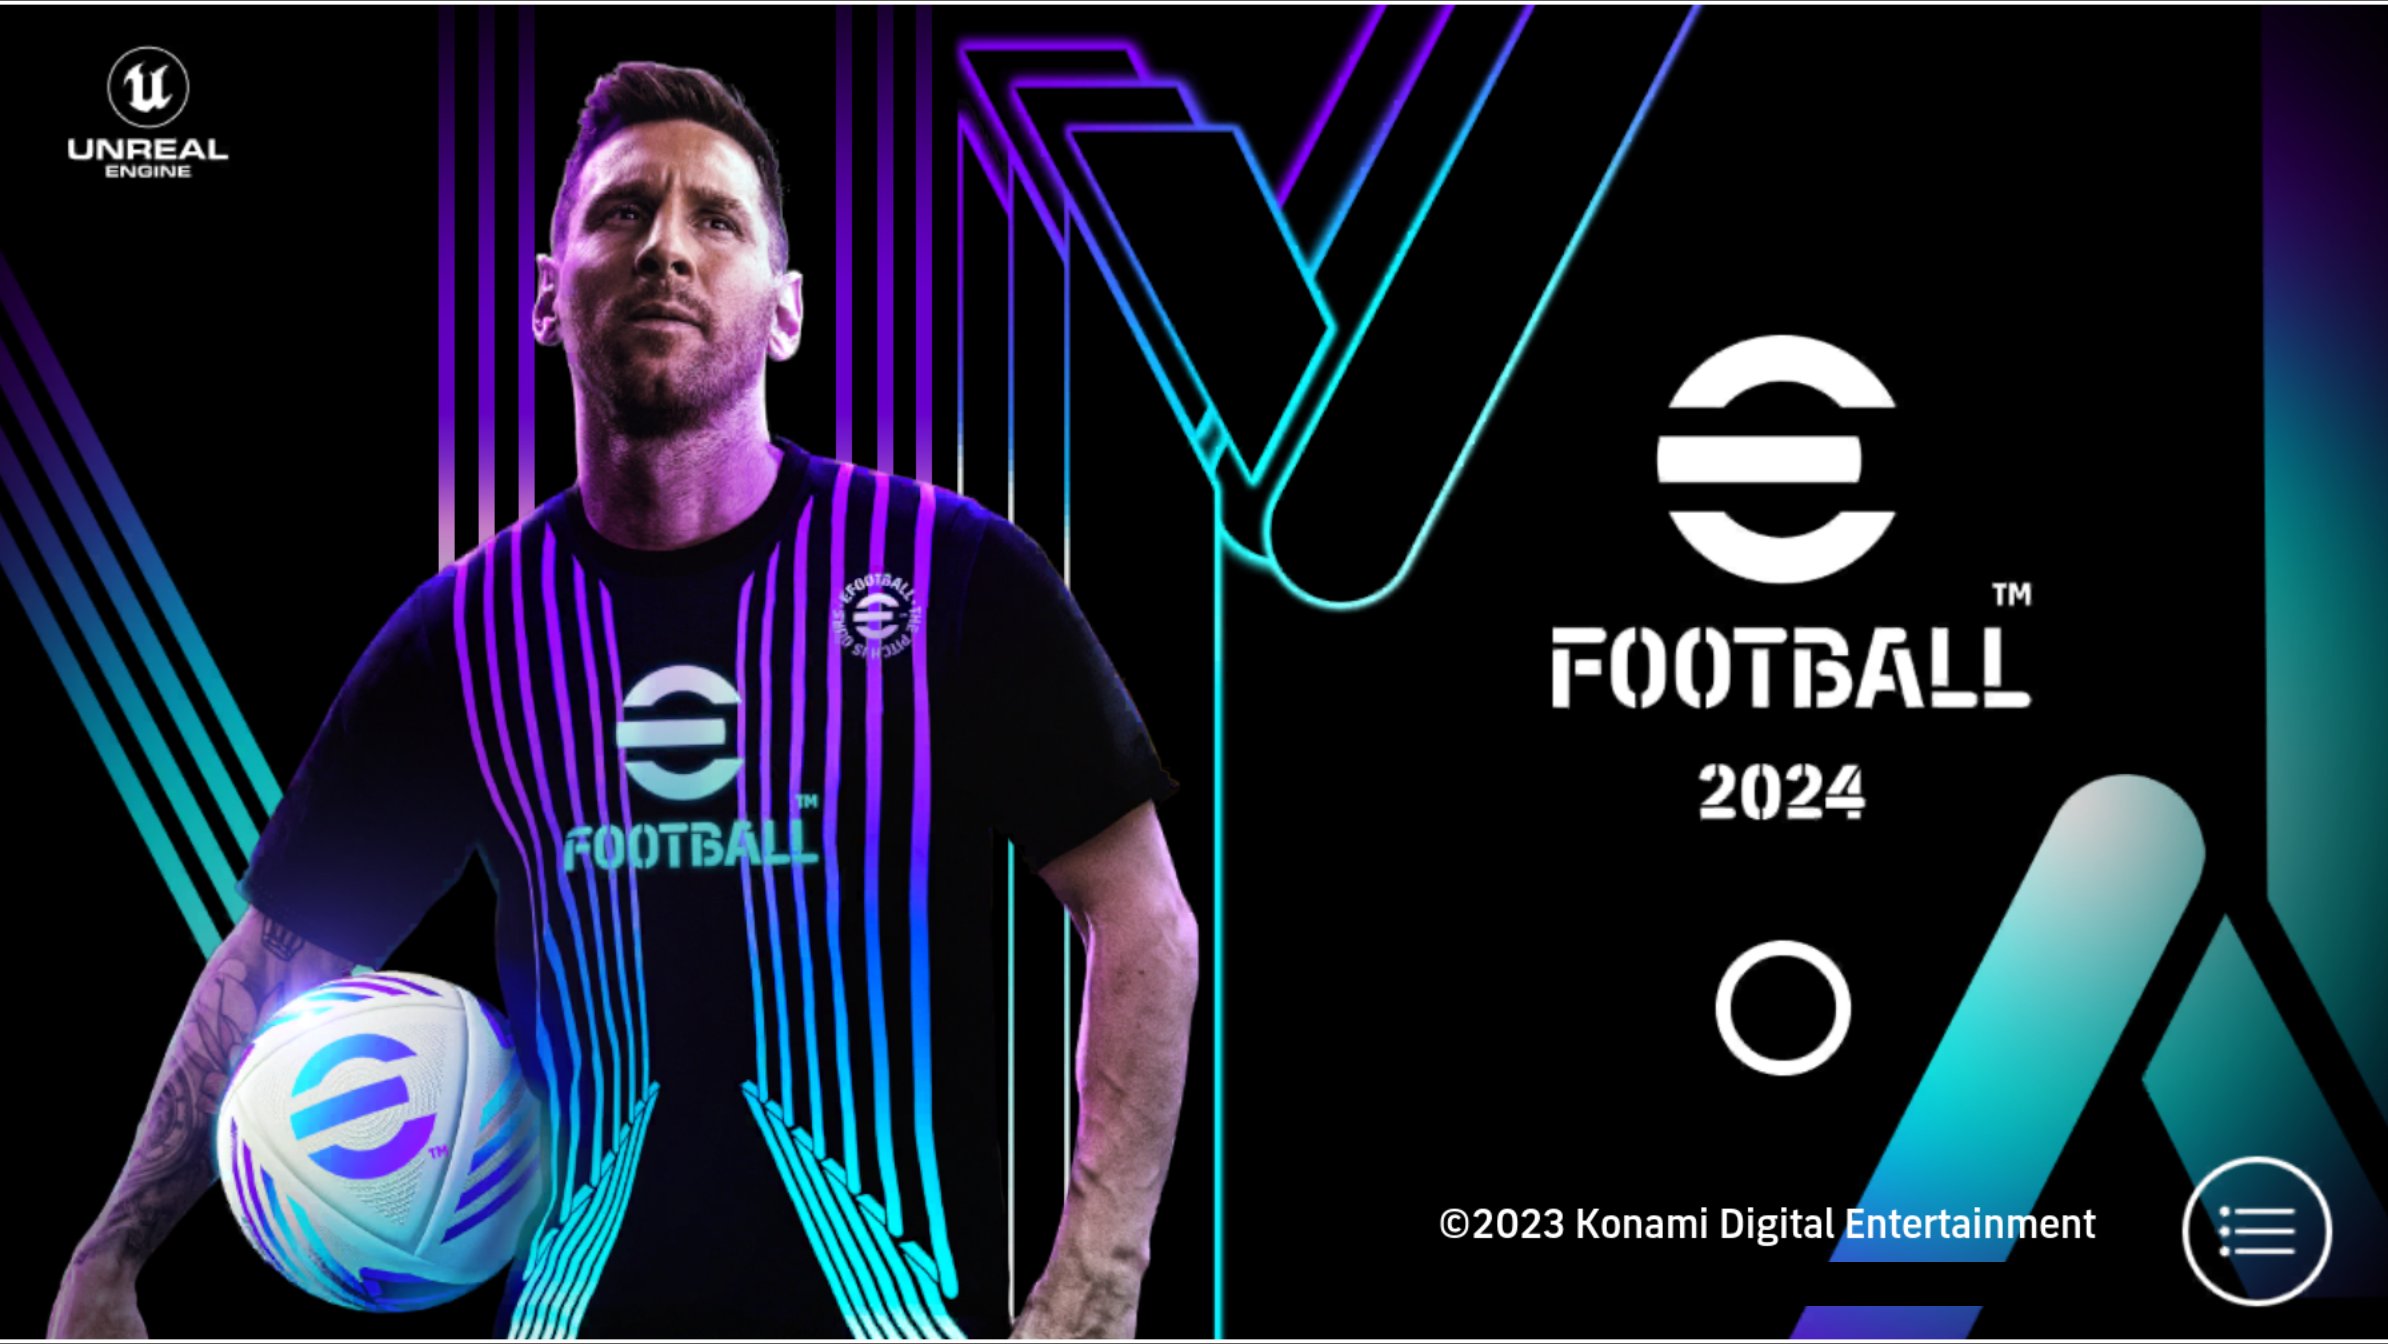 eFootball 2023 v2 Update - It's in a Bad Place - Operation Sports